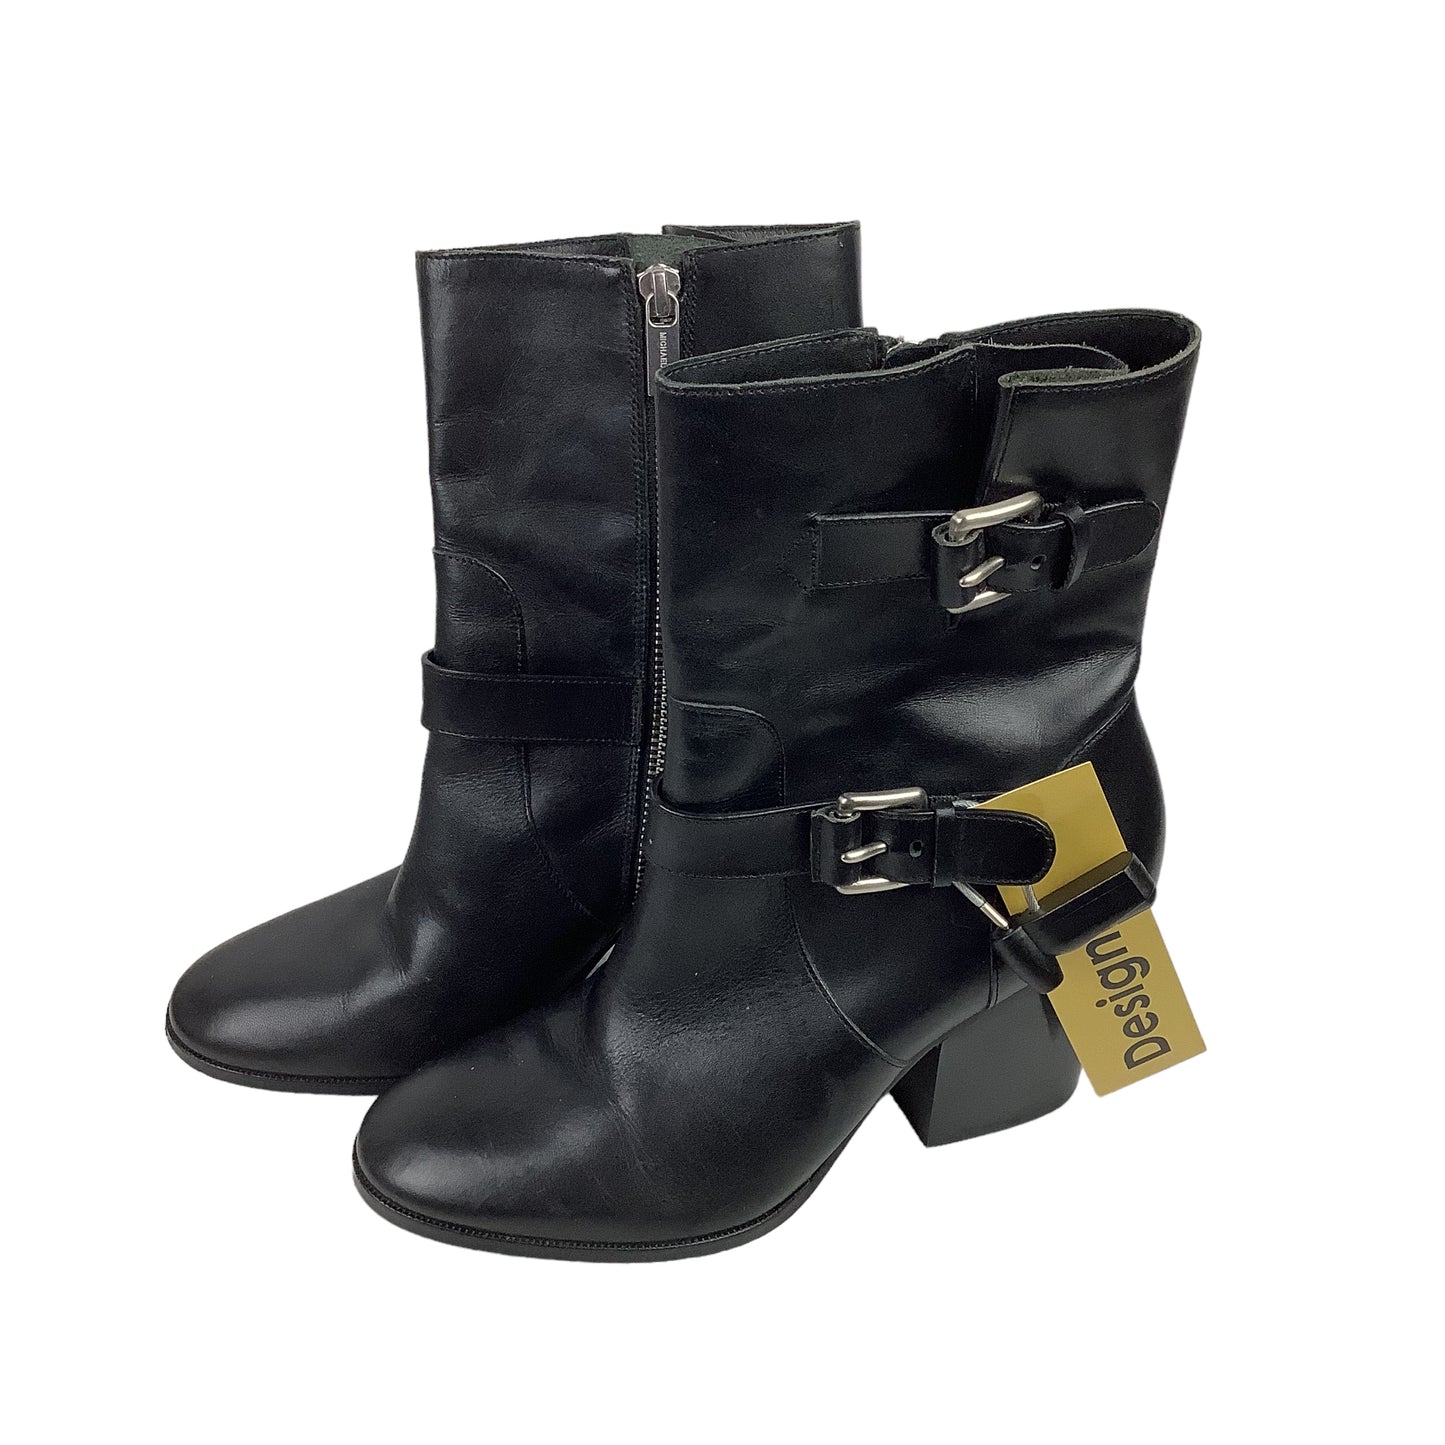 Boots Designer By Michael By Michael Kors  Size: 7.5